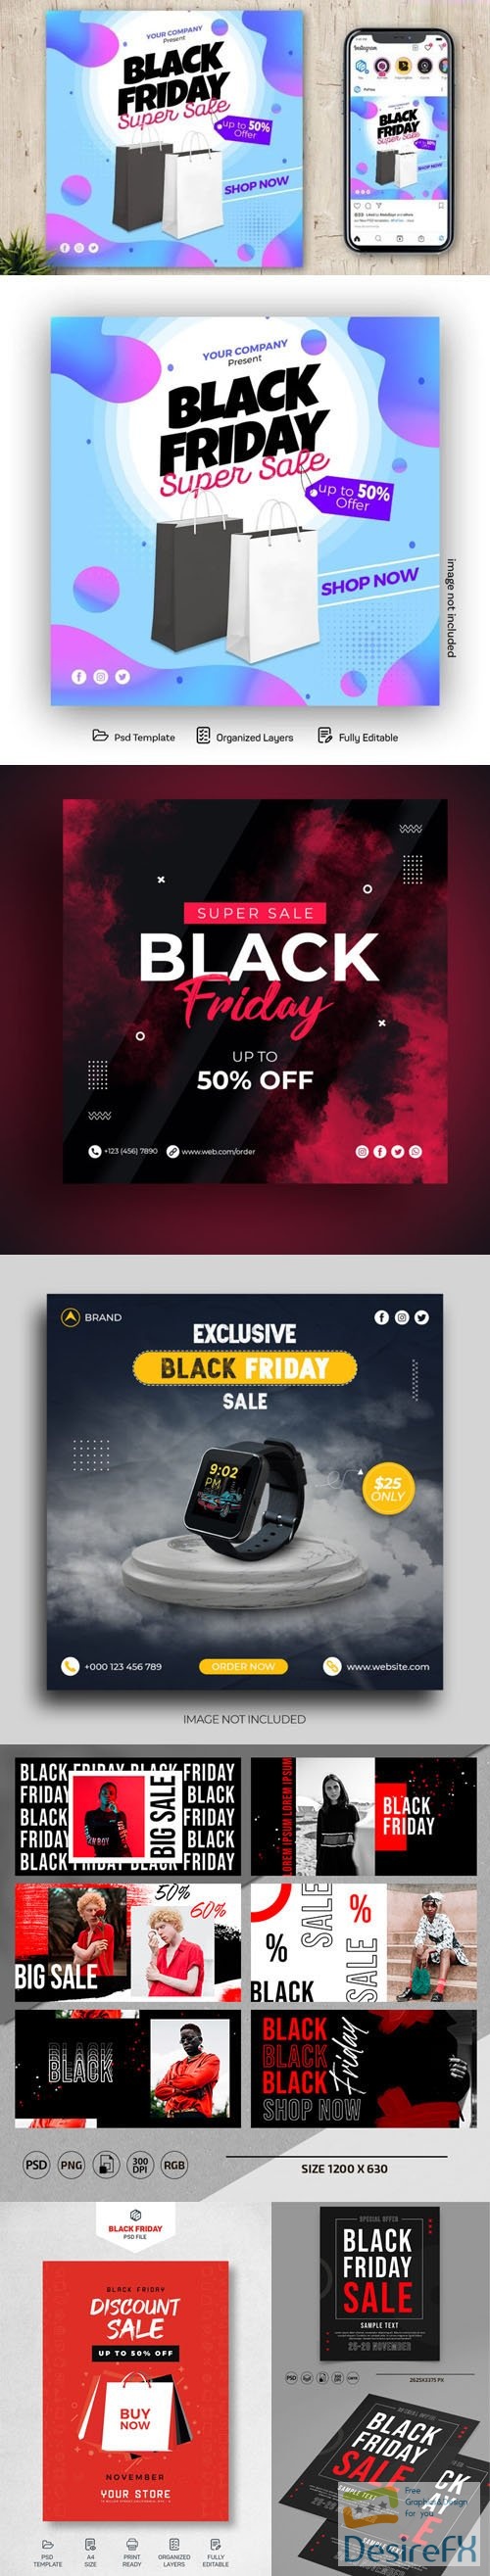 10+ Modern Black Friday Templates Collection